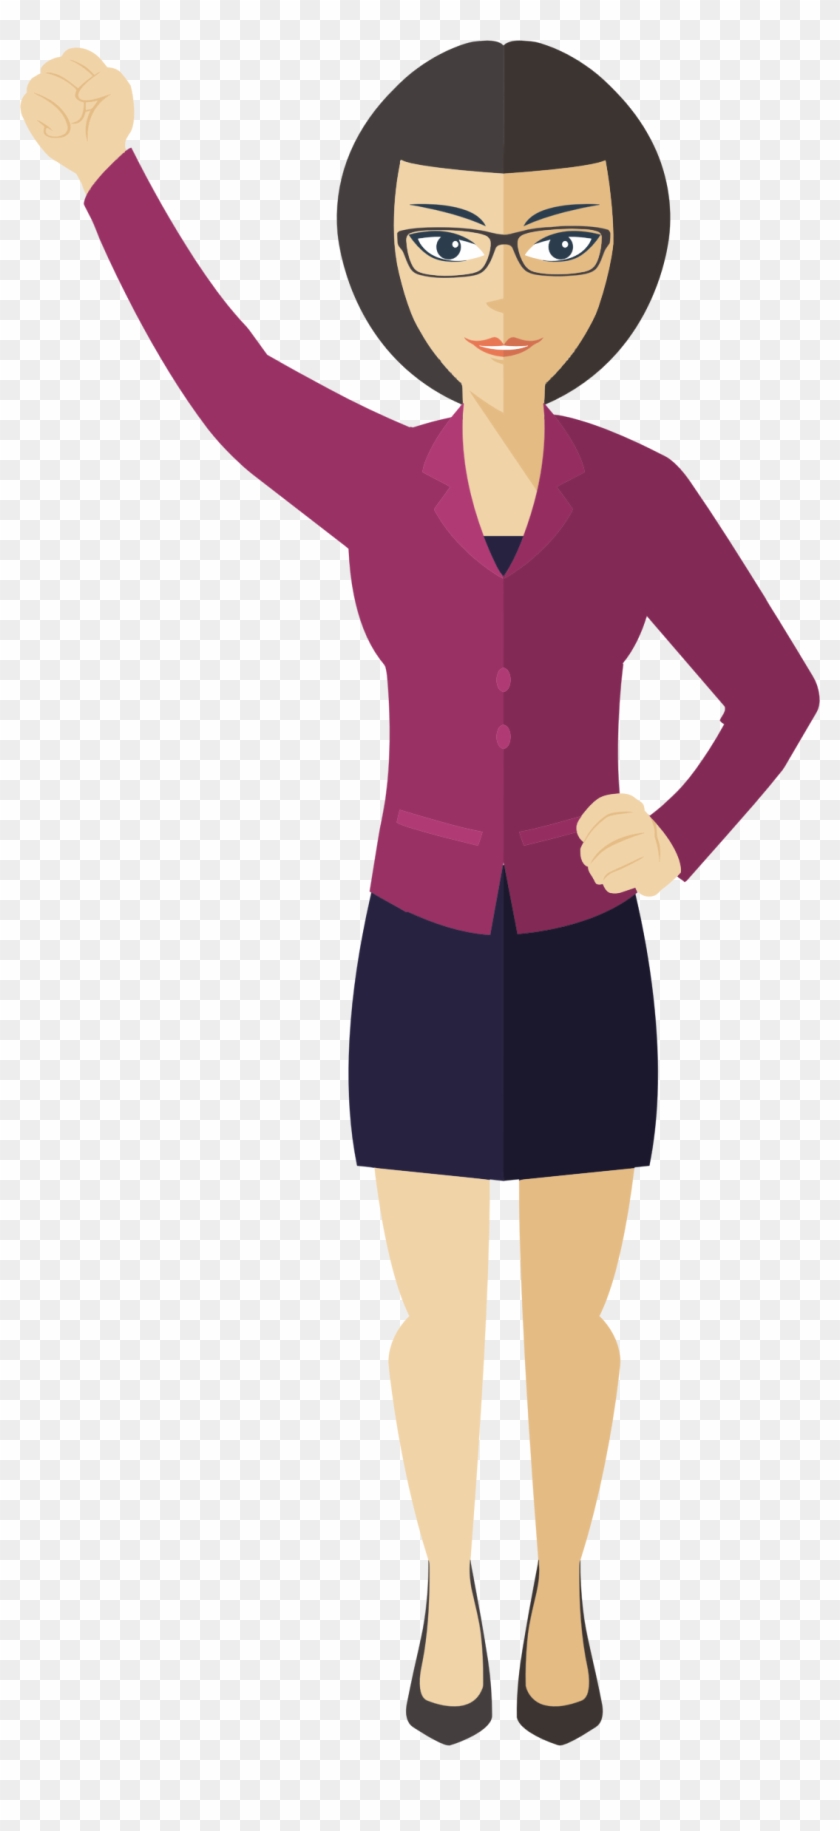 Business Woman Clipart - Business Woman Png #109379